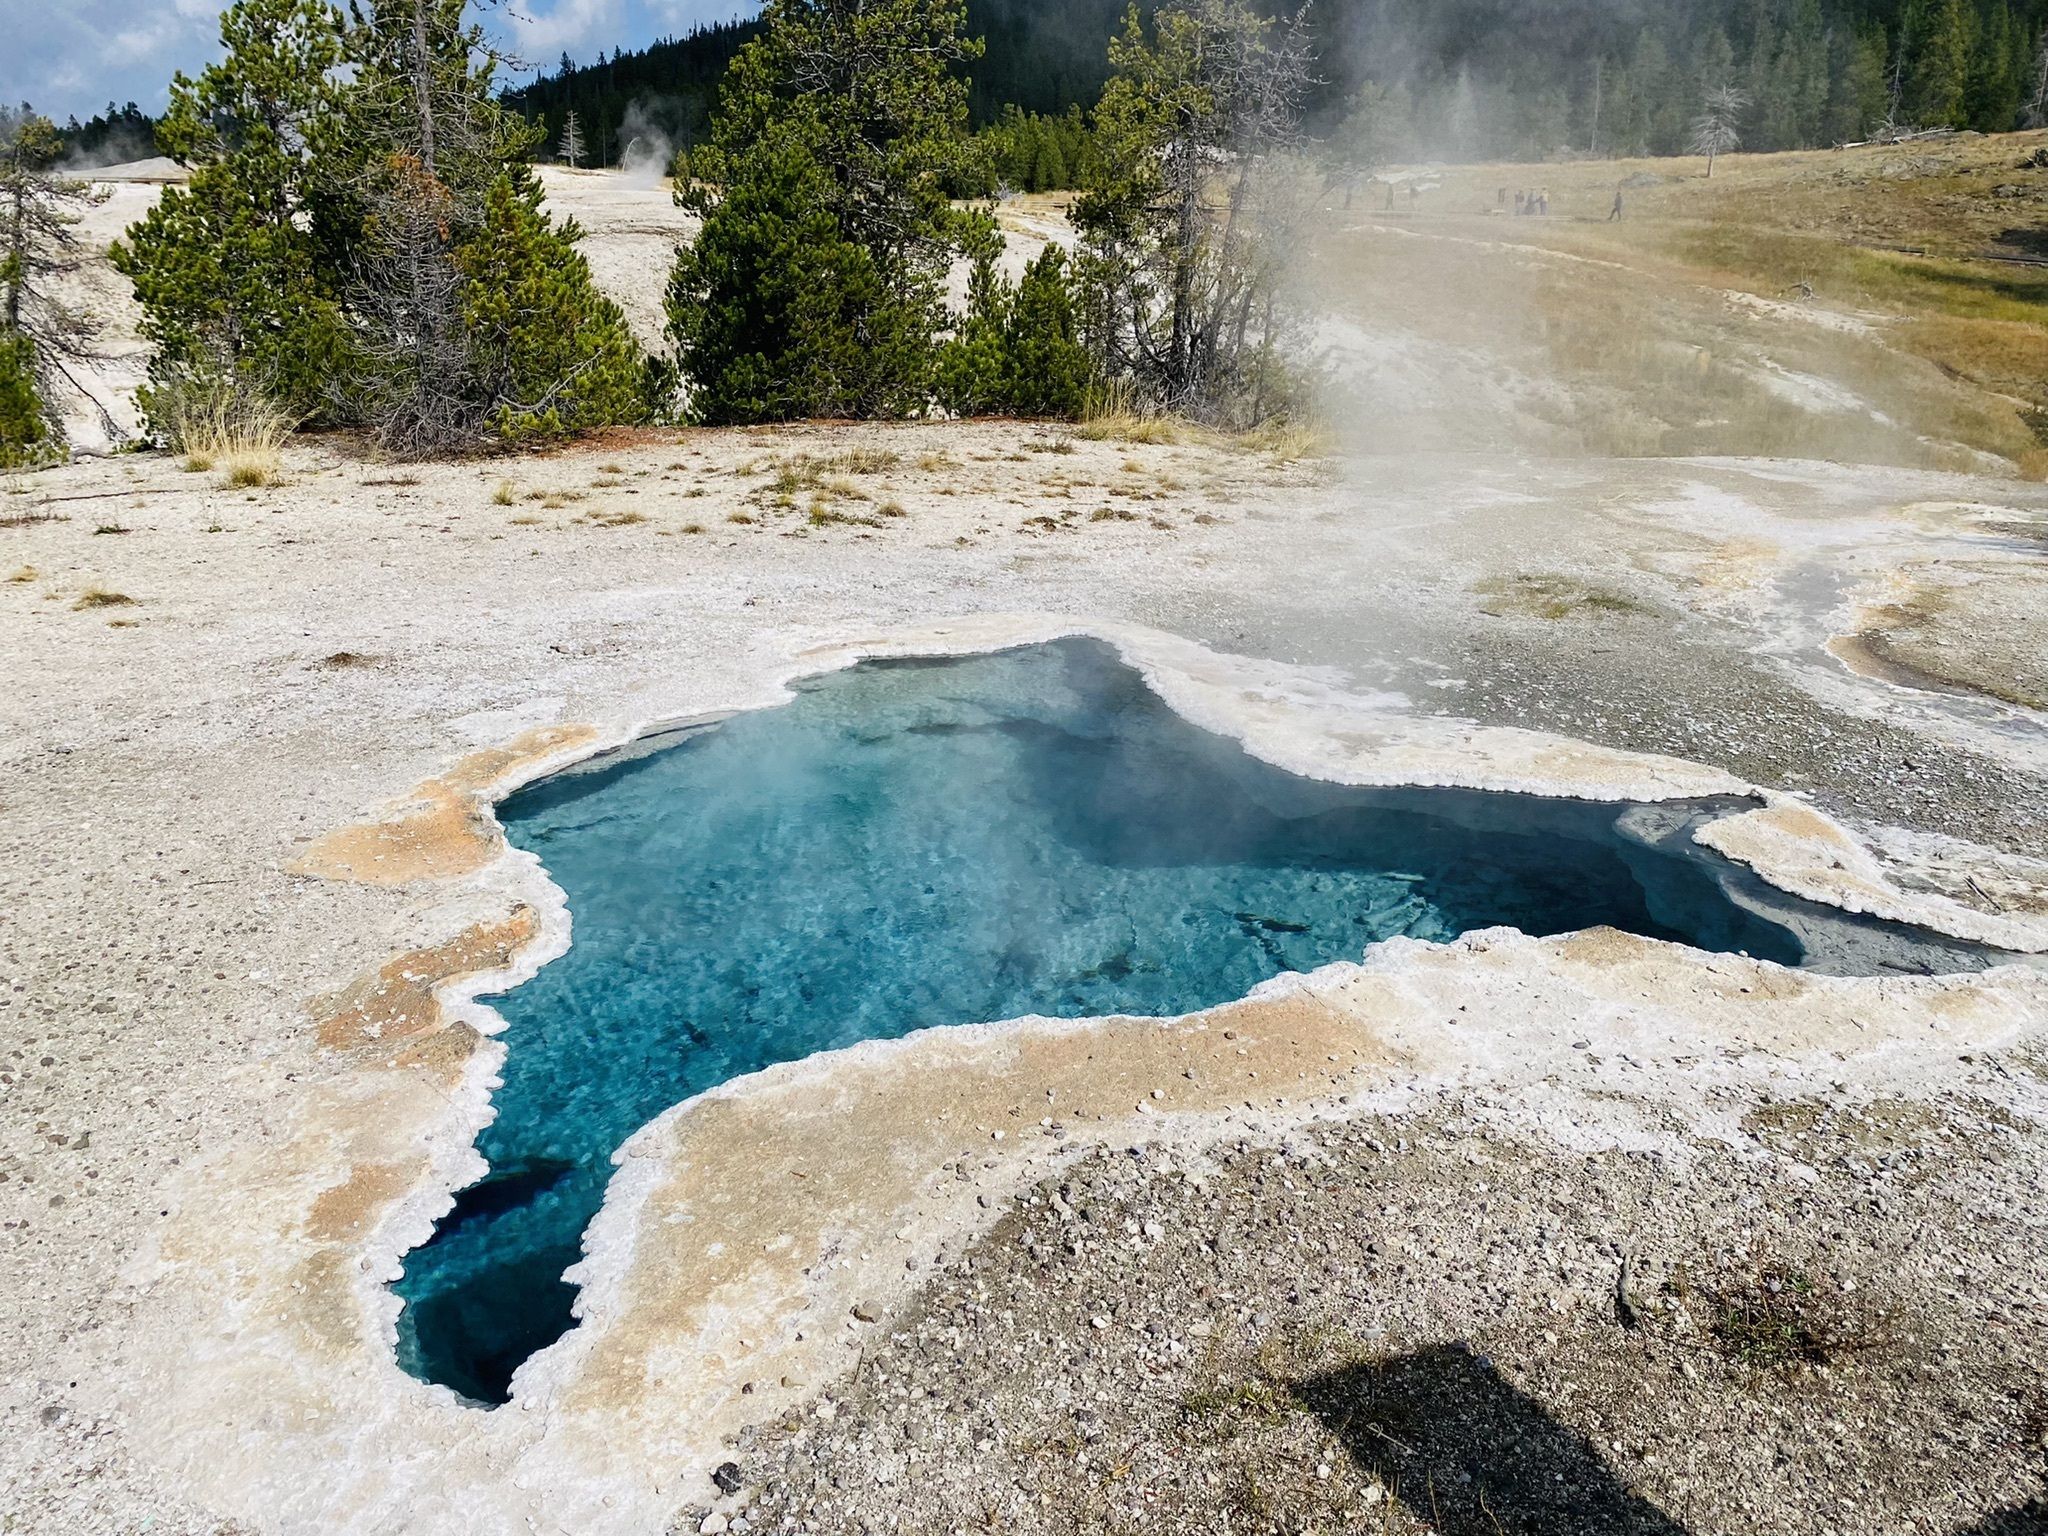 The famous Old Faithful Geyser in Yellowstone National Park